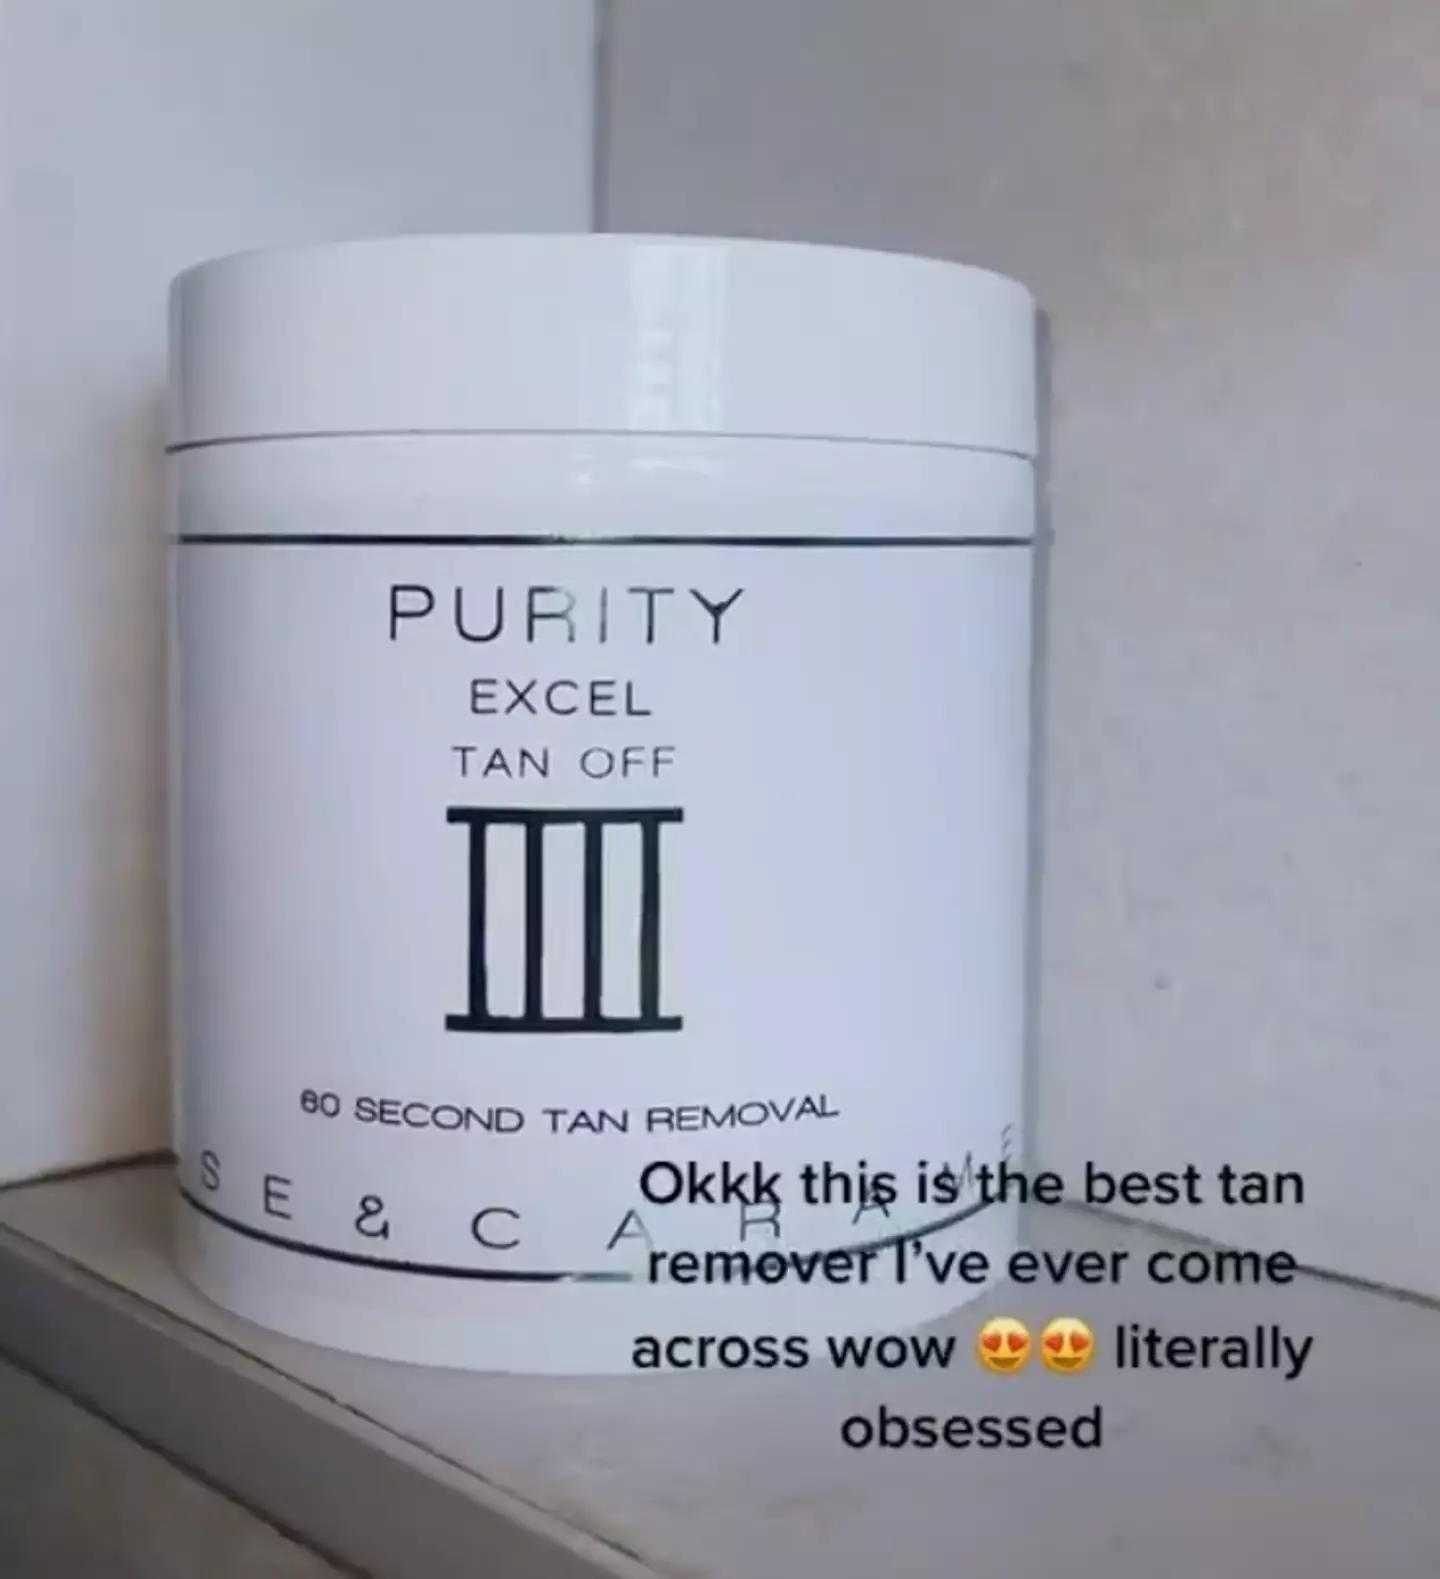 People are raving about this fake tan remover.